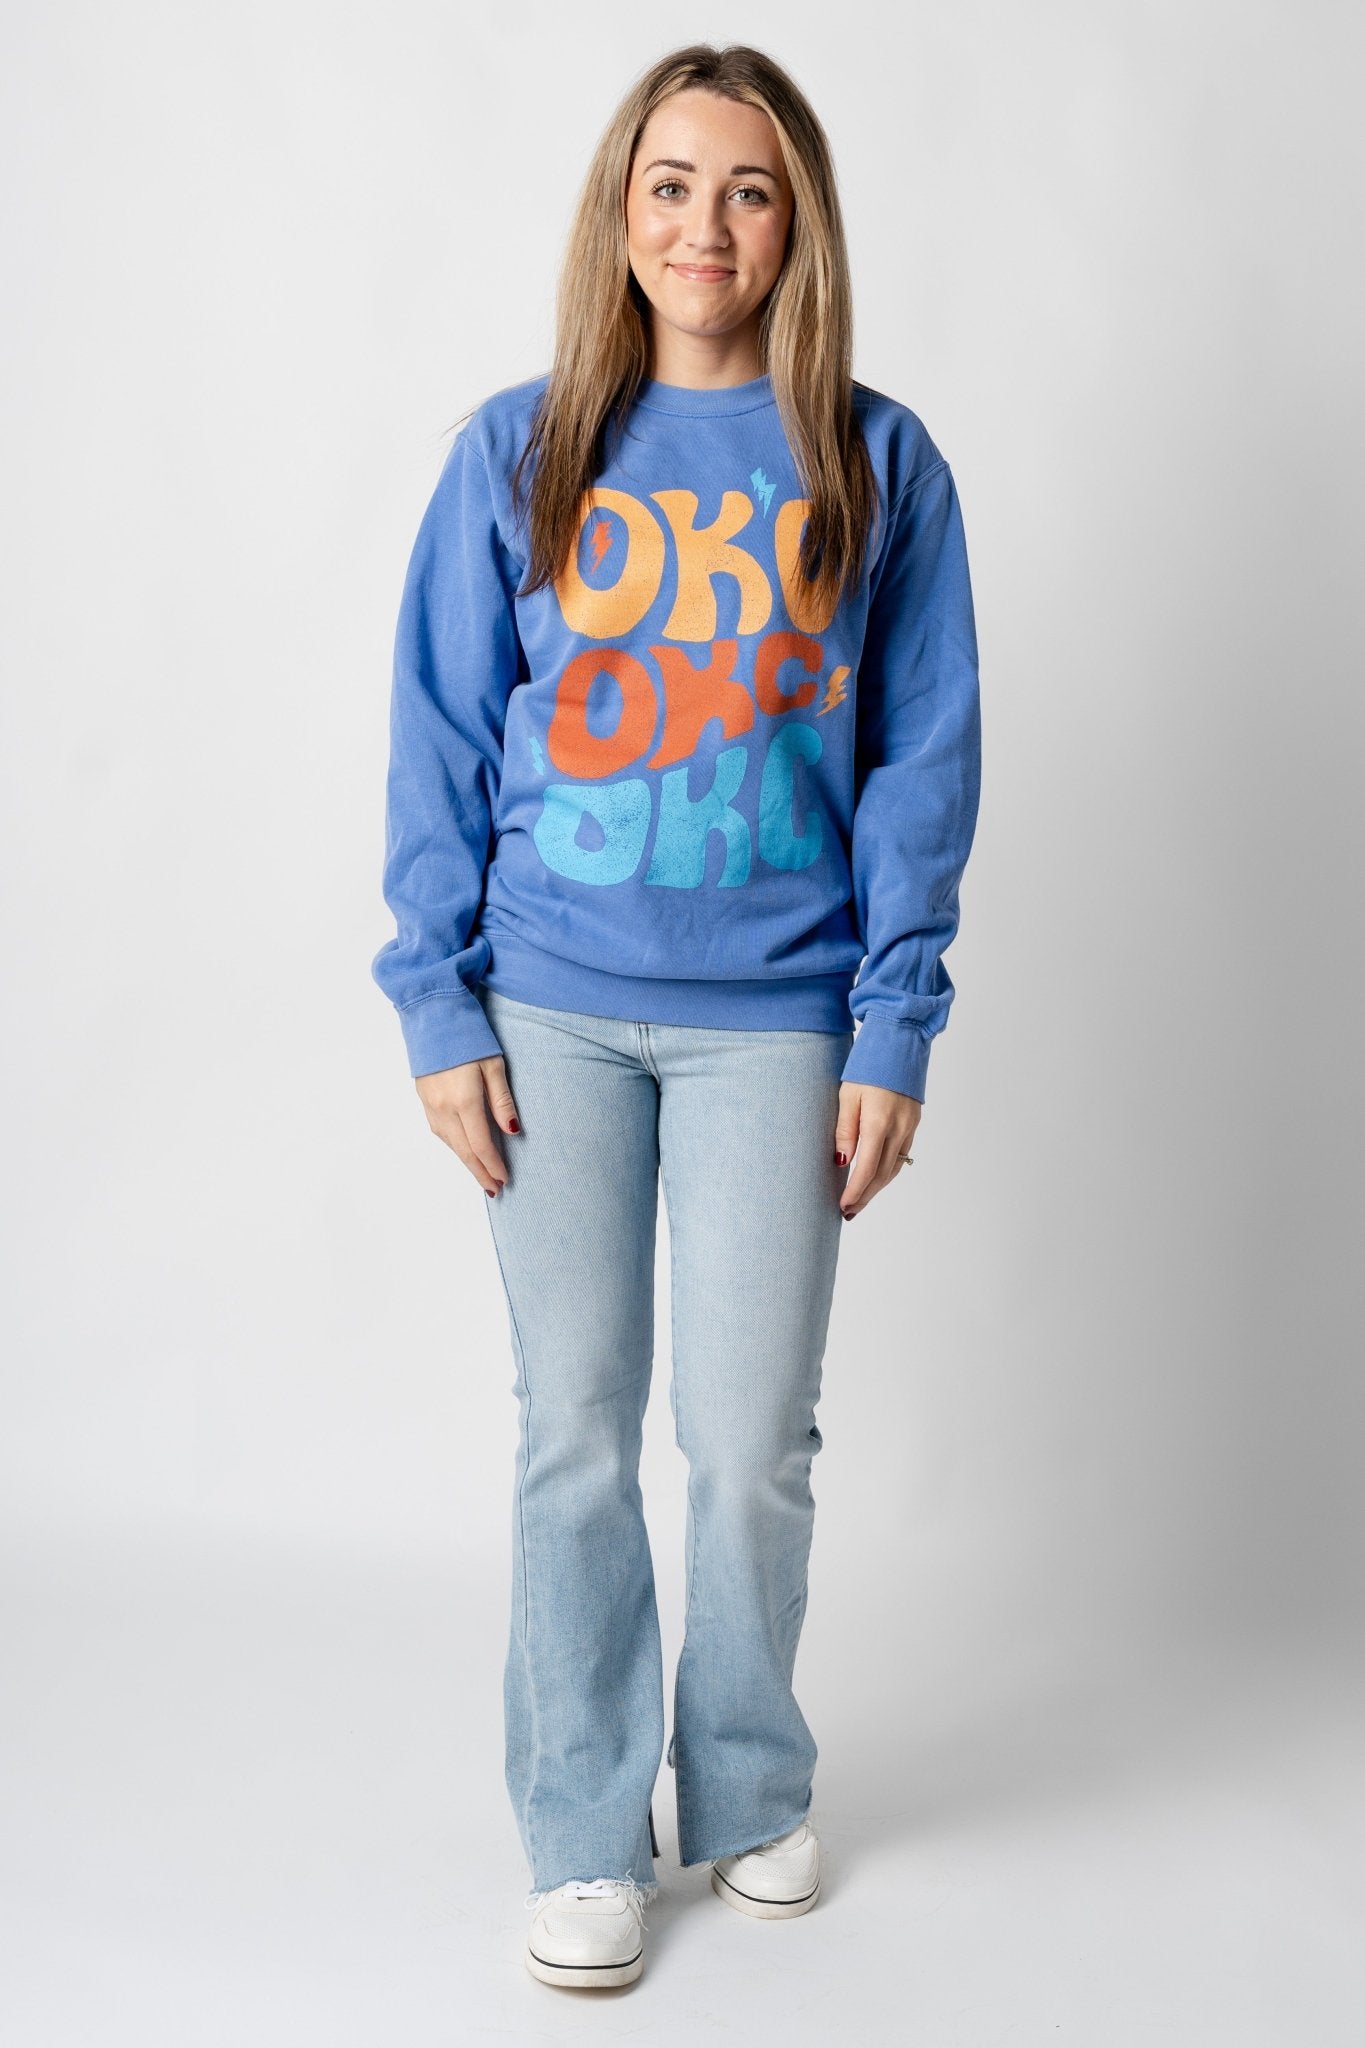 OKC repeater stars comfort colors sweatshirt flo blue - Oklahoma City inspired graphic t-shirts at Lush Fashion Lounge Boutique in Oklahoma City